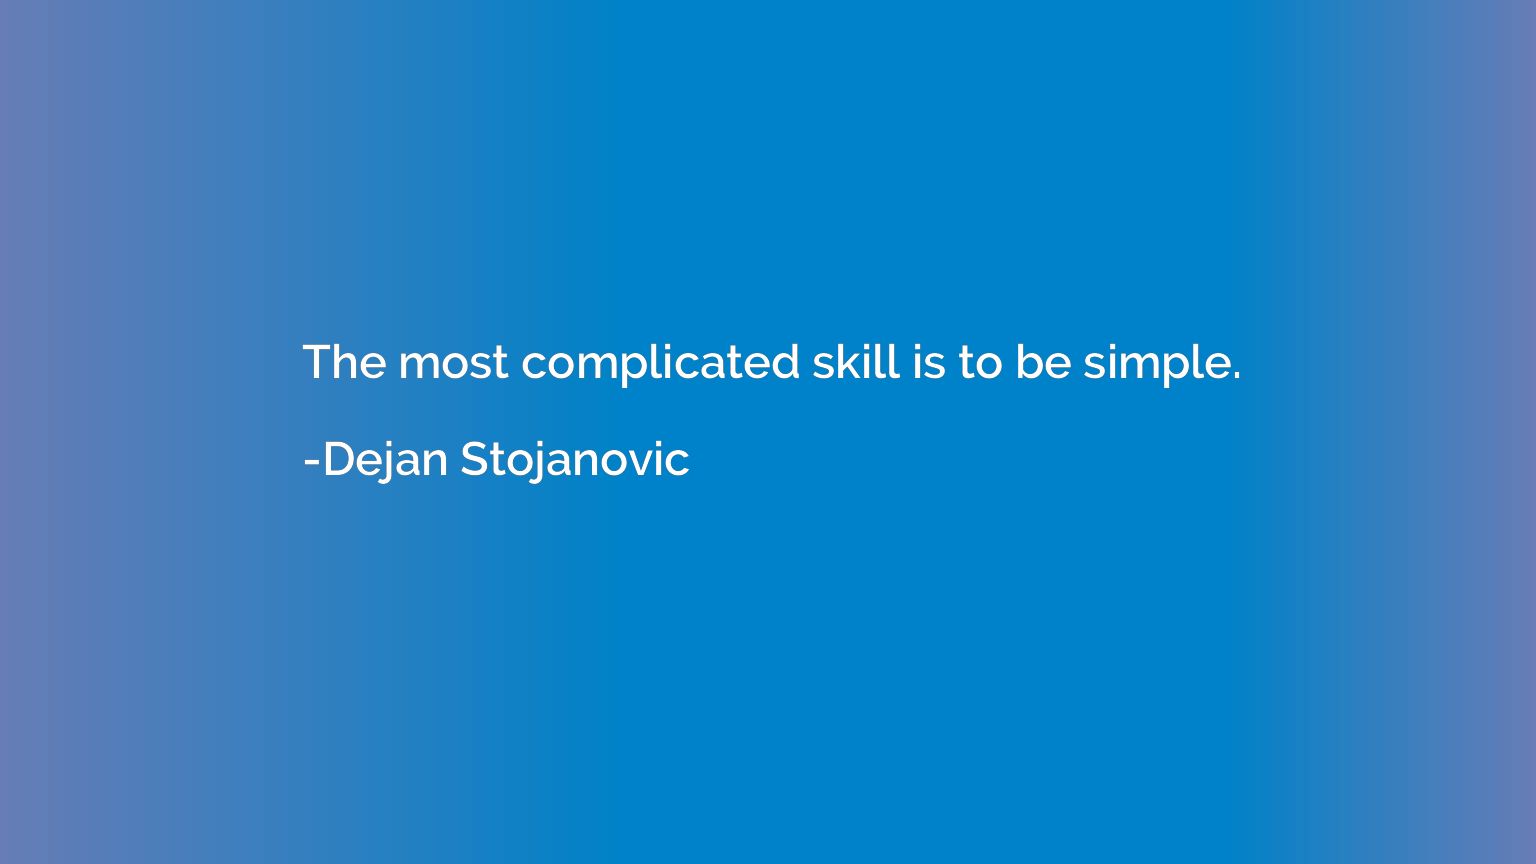 The most complicated skill is to be simple.